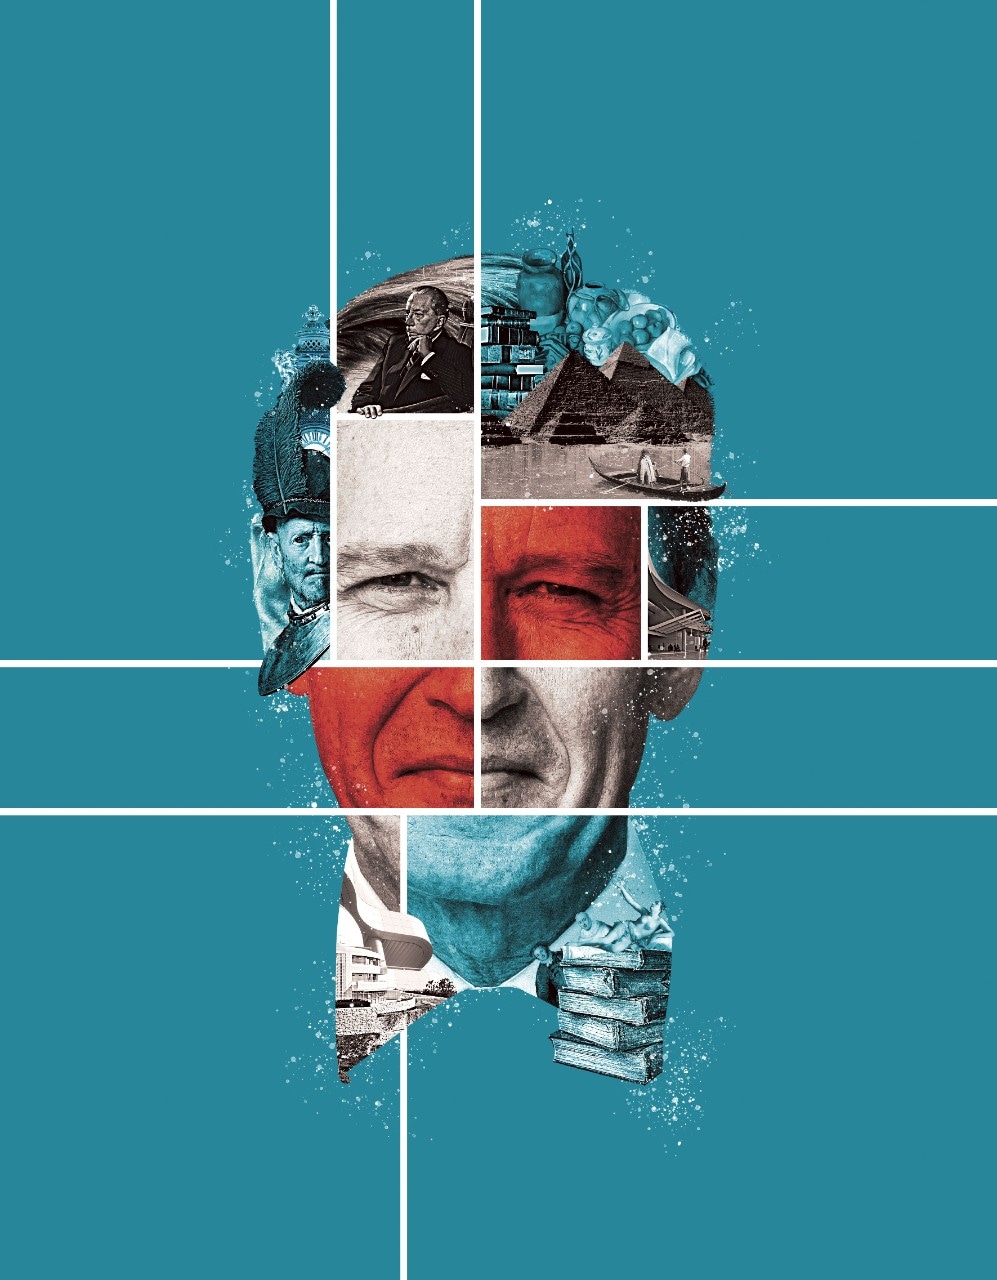 The face of Tim Potts turned into a multi-coloured collage comprised of elements related to the Getty Museum, including works or art, historic landscapes and an image of J Paul Getty.